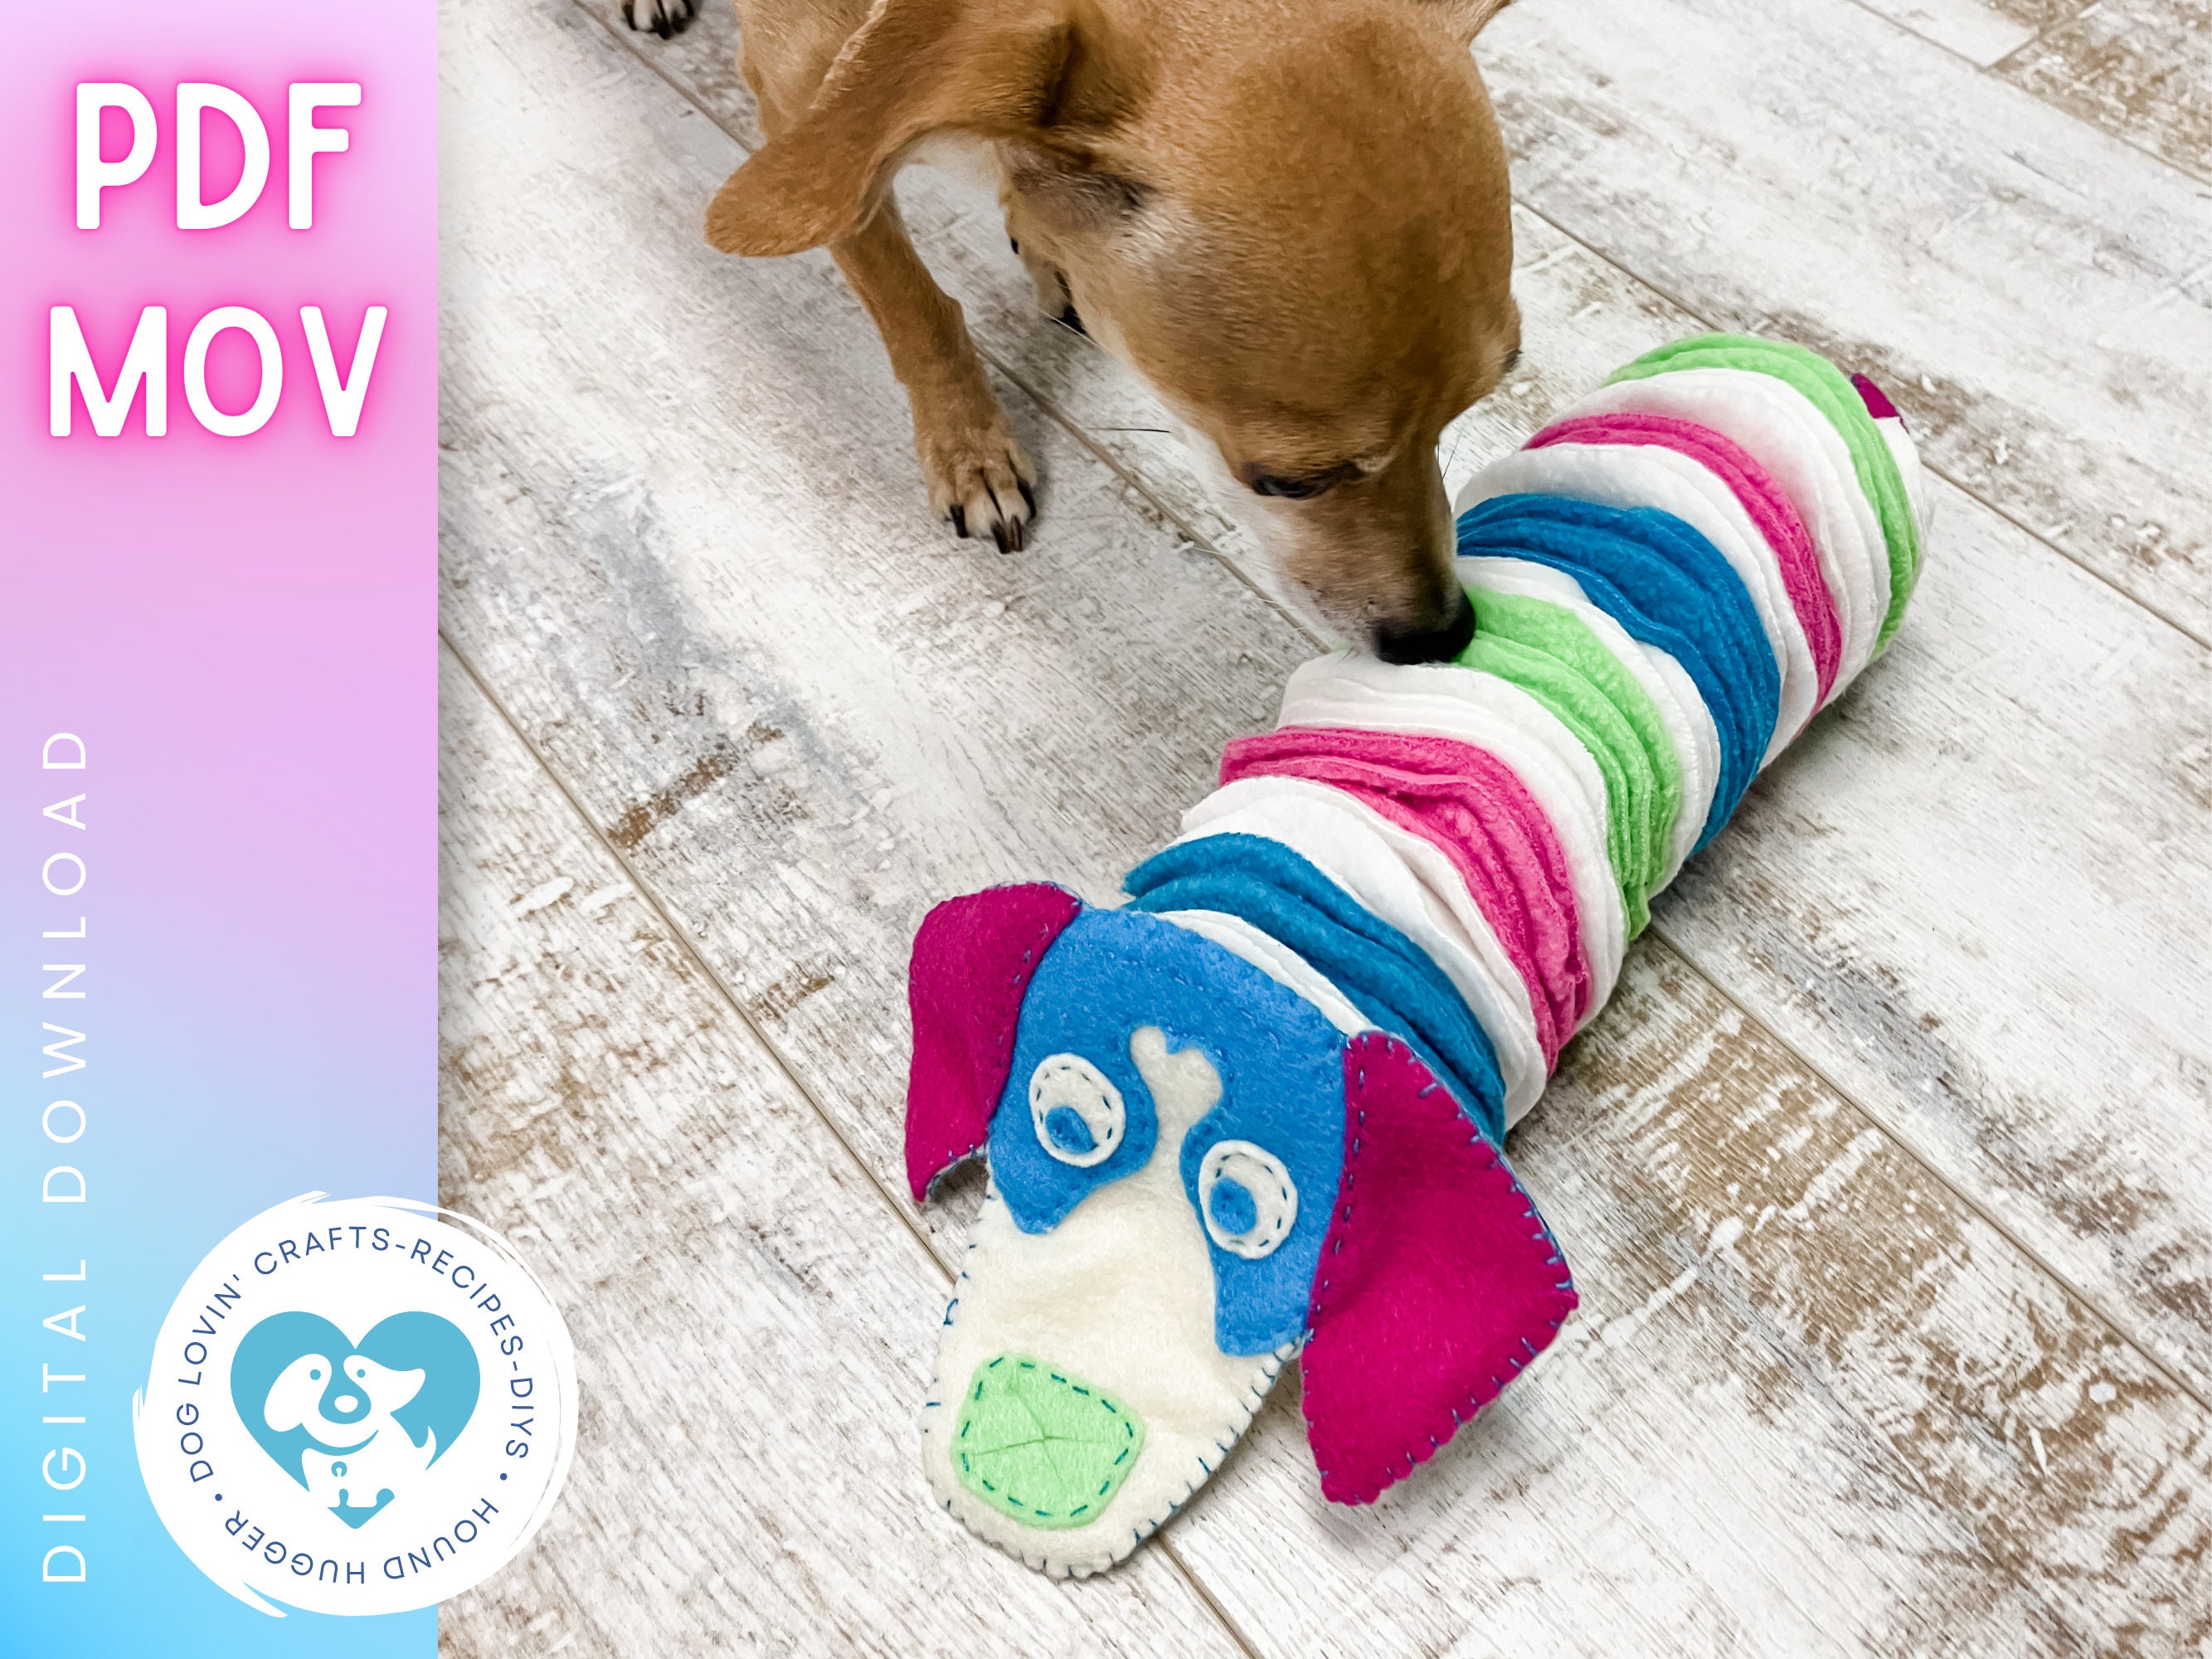 How to Make Your Own Homemade Dog Toys - PetHelpful